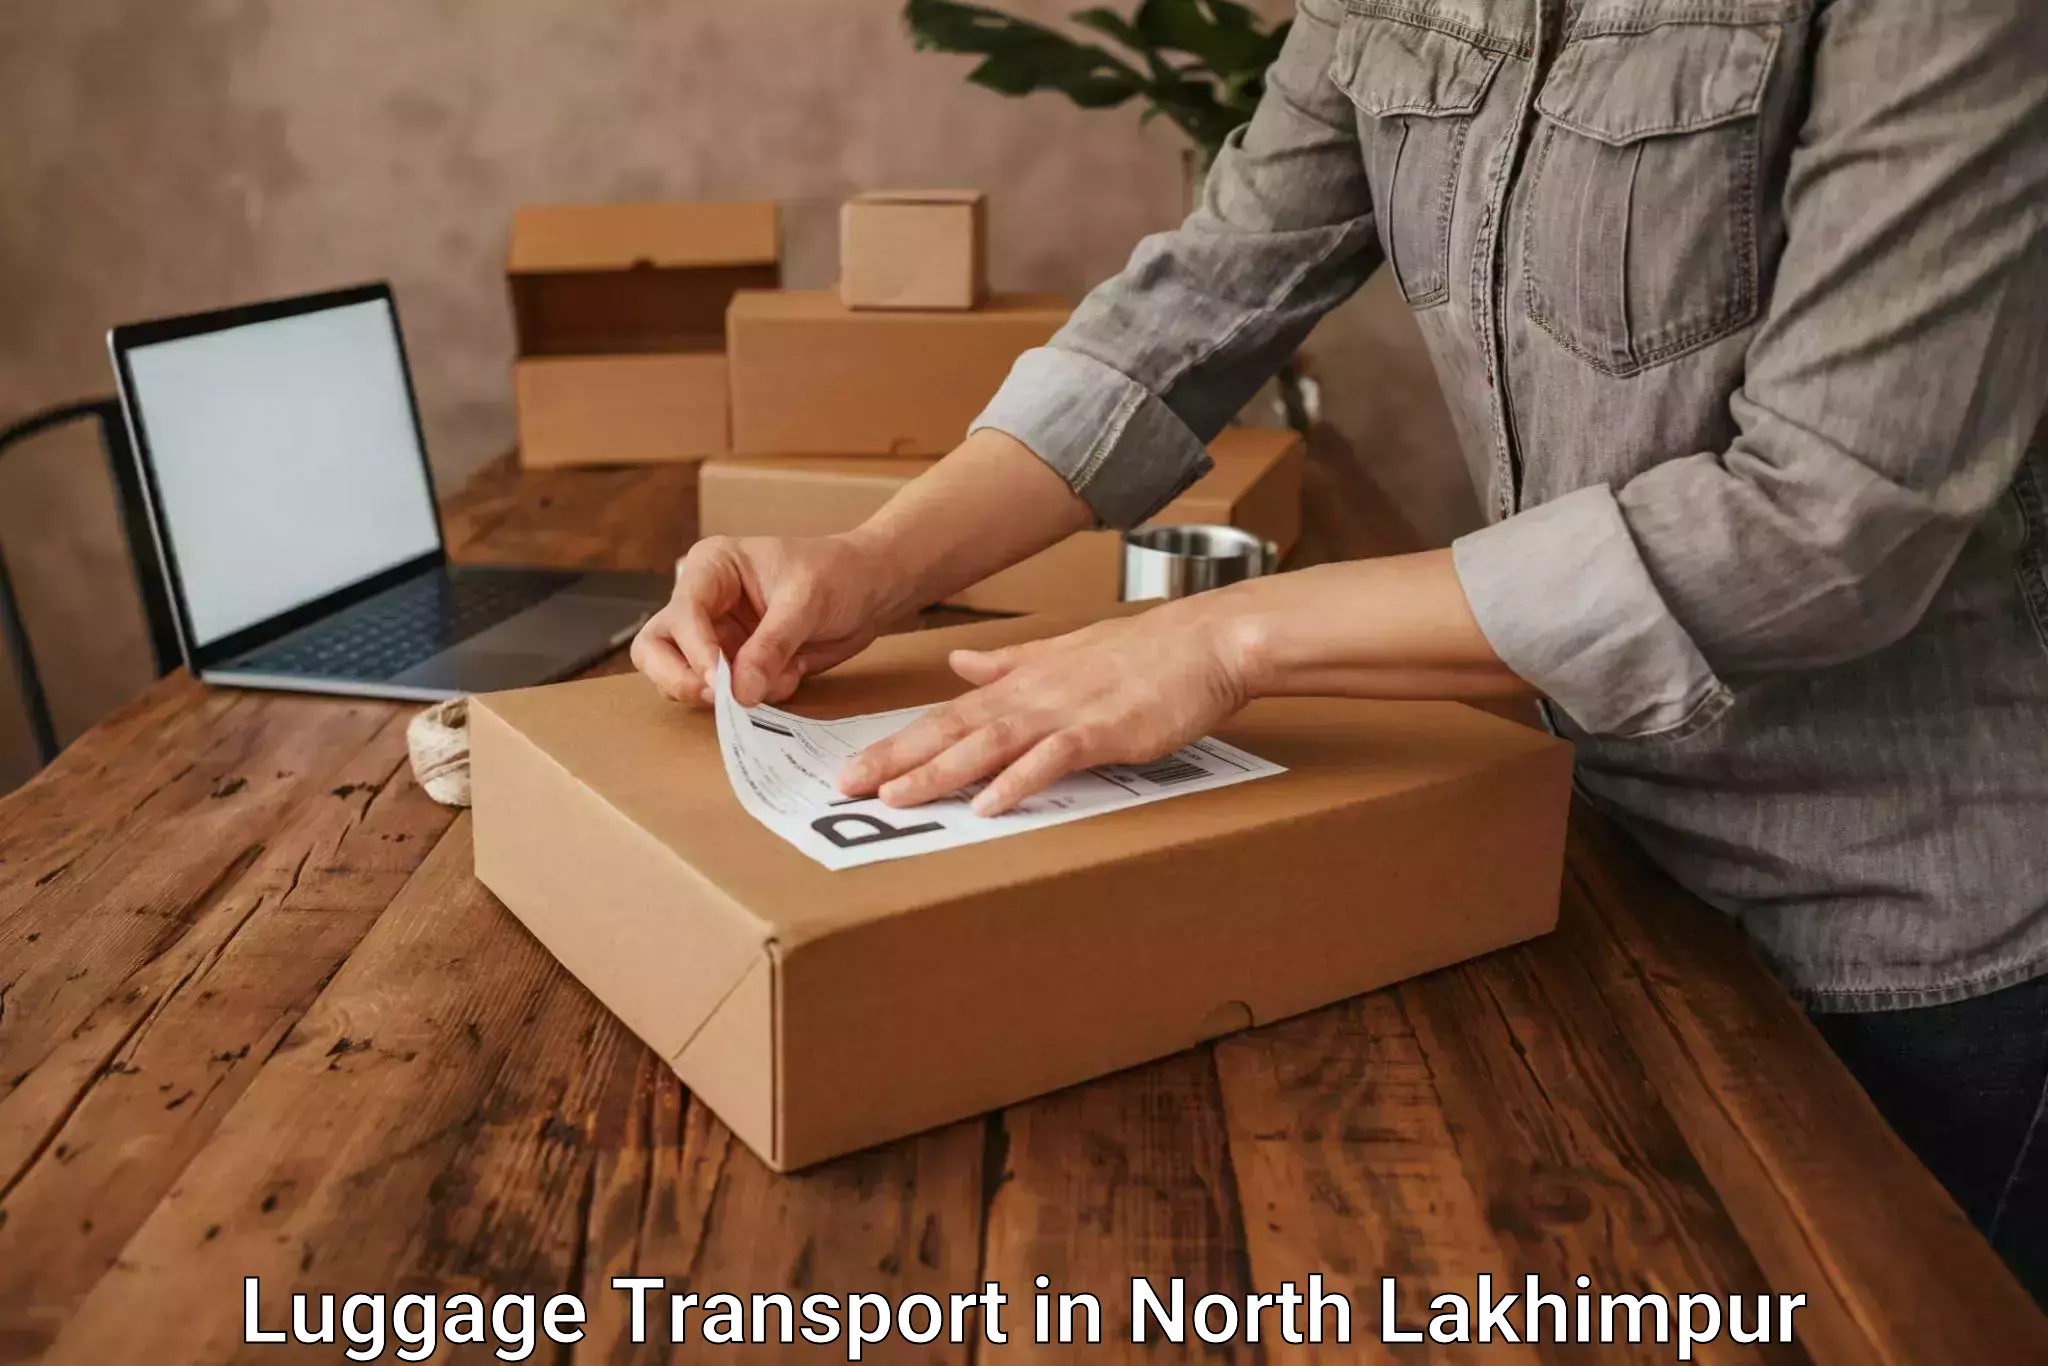 Baggage relocation service in North Lakhimpur